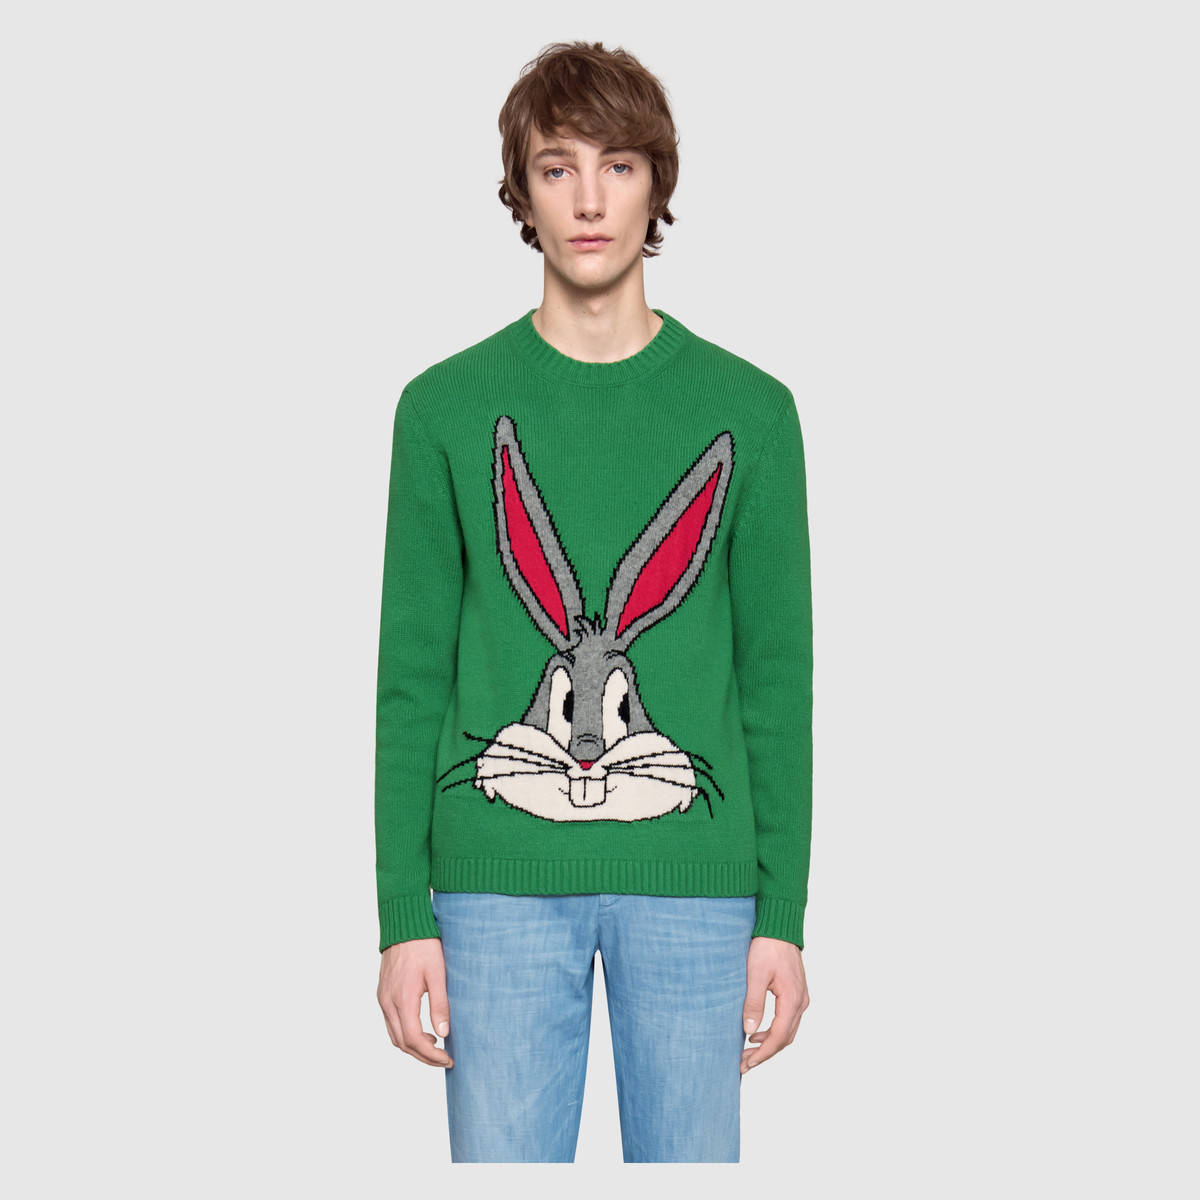 Shop the new Gucci Bugs Bunny Knit Sweater